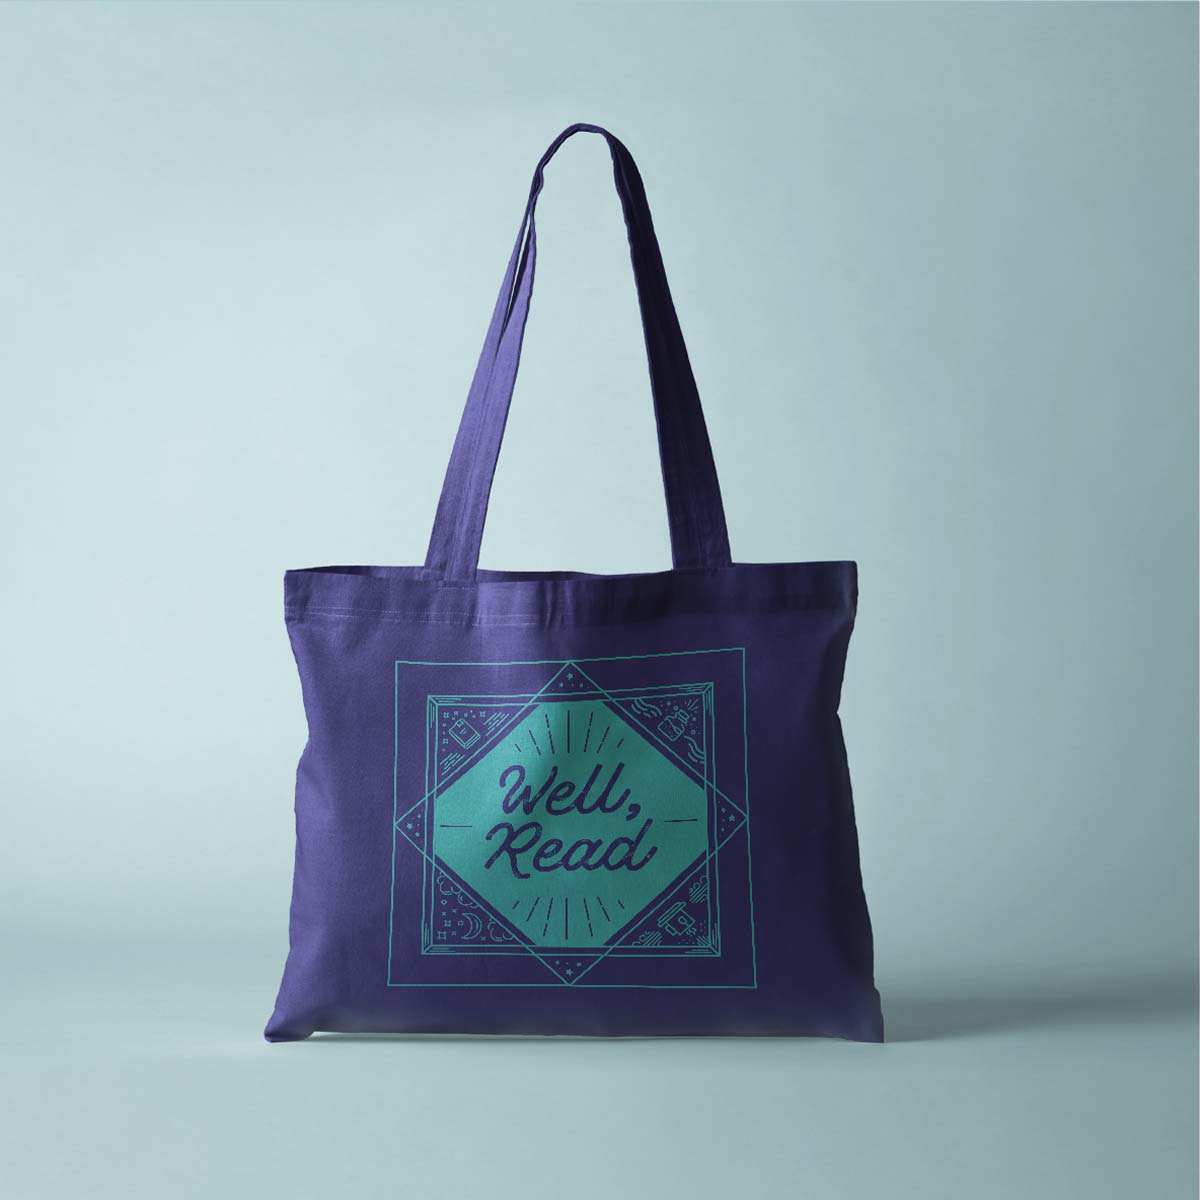 Graphic Design for Ackerly Green Publishing: Well, read Tote Bag